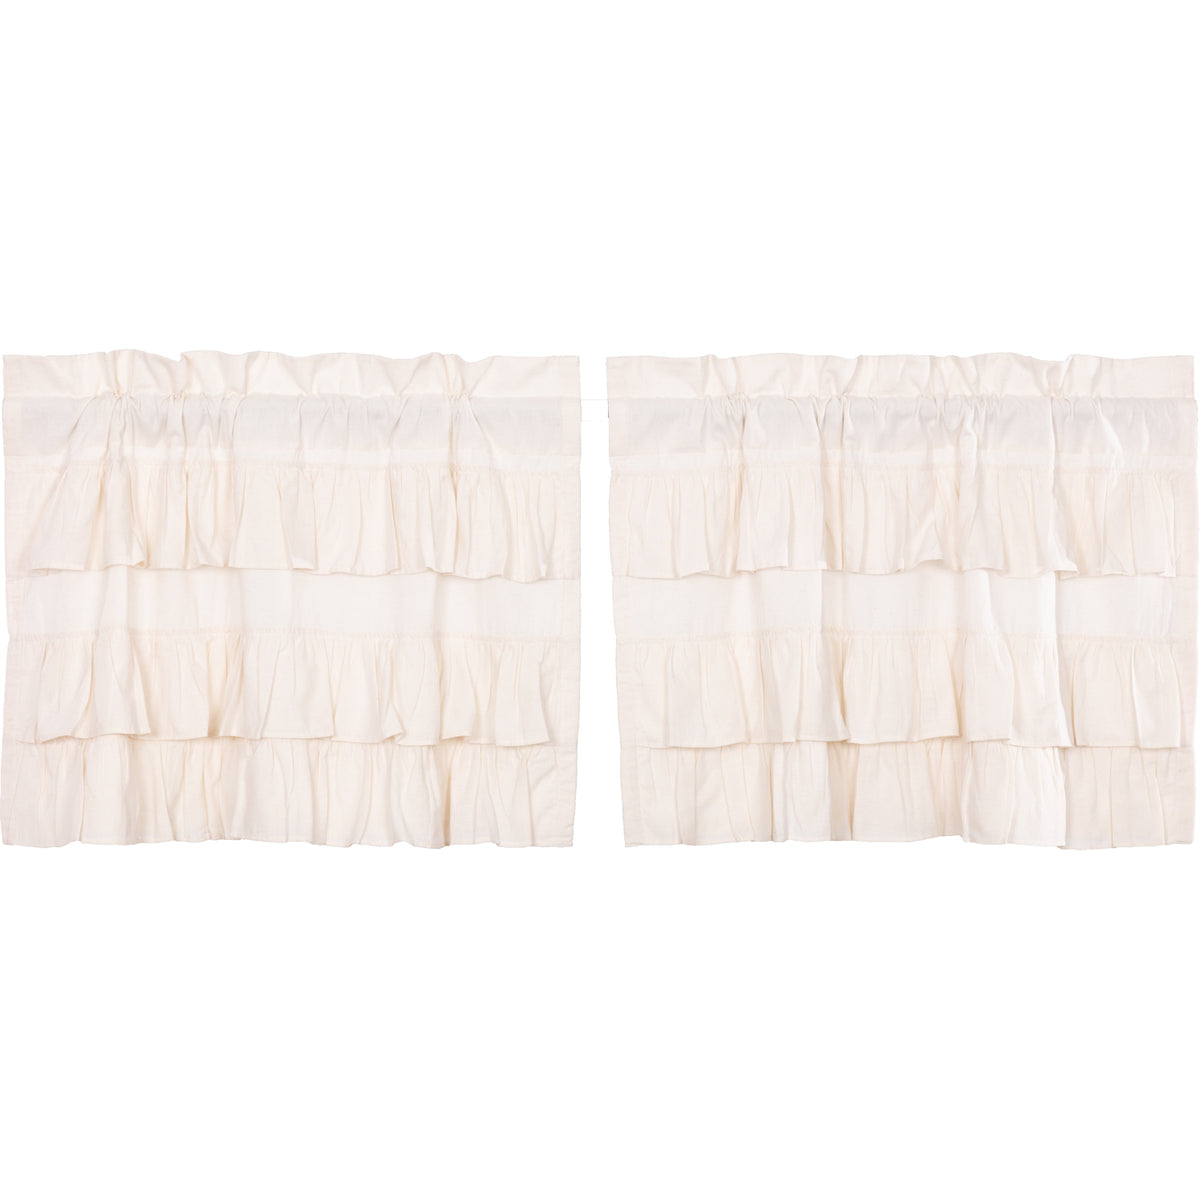 Simple Life Flax Antique White Ruffled Tier Set of 2 L24xW36